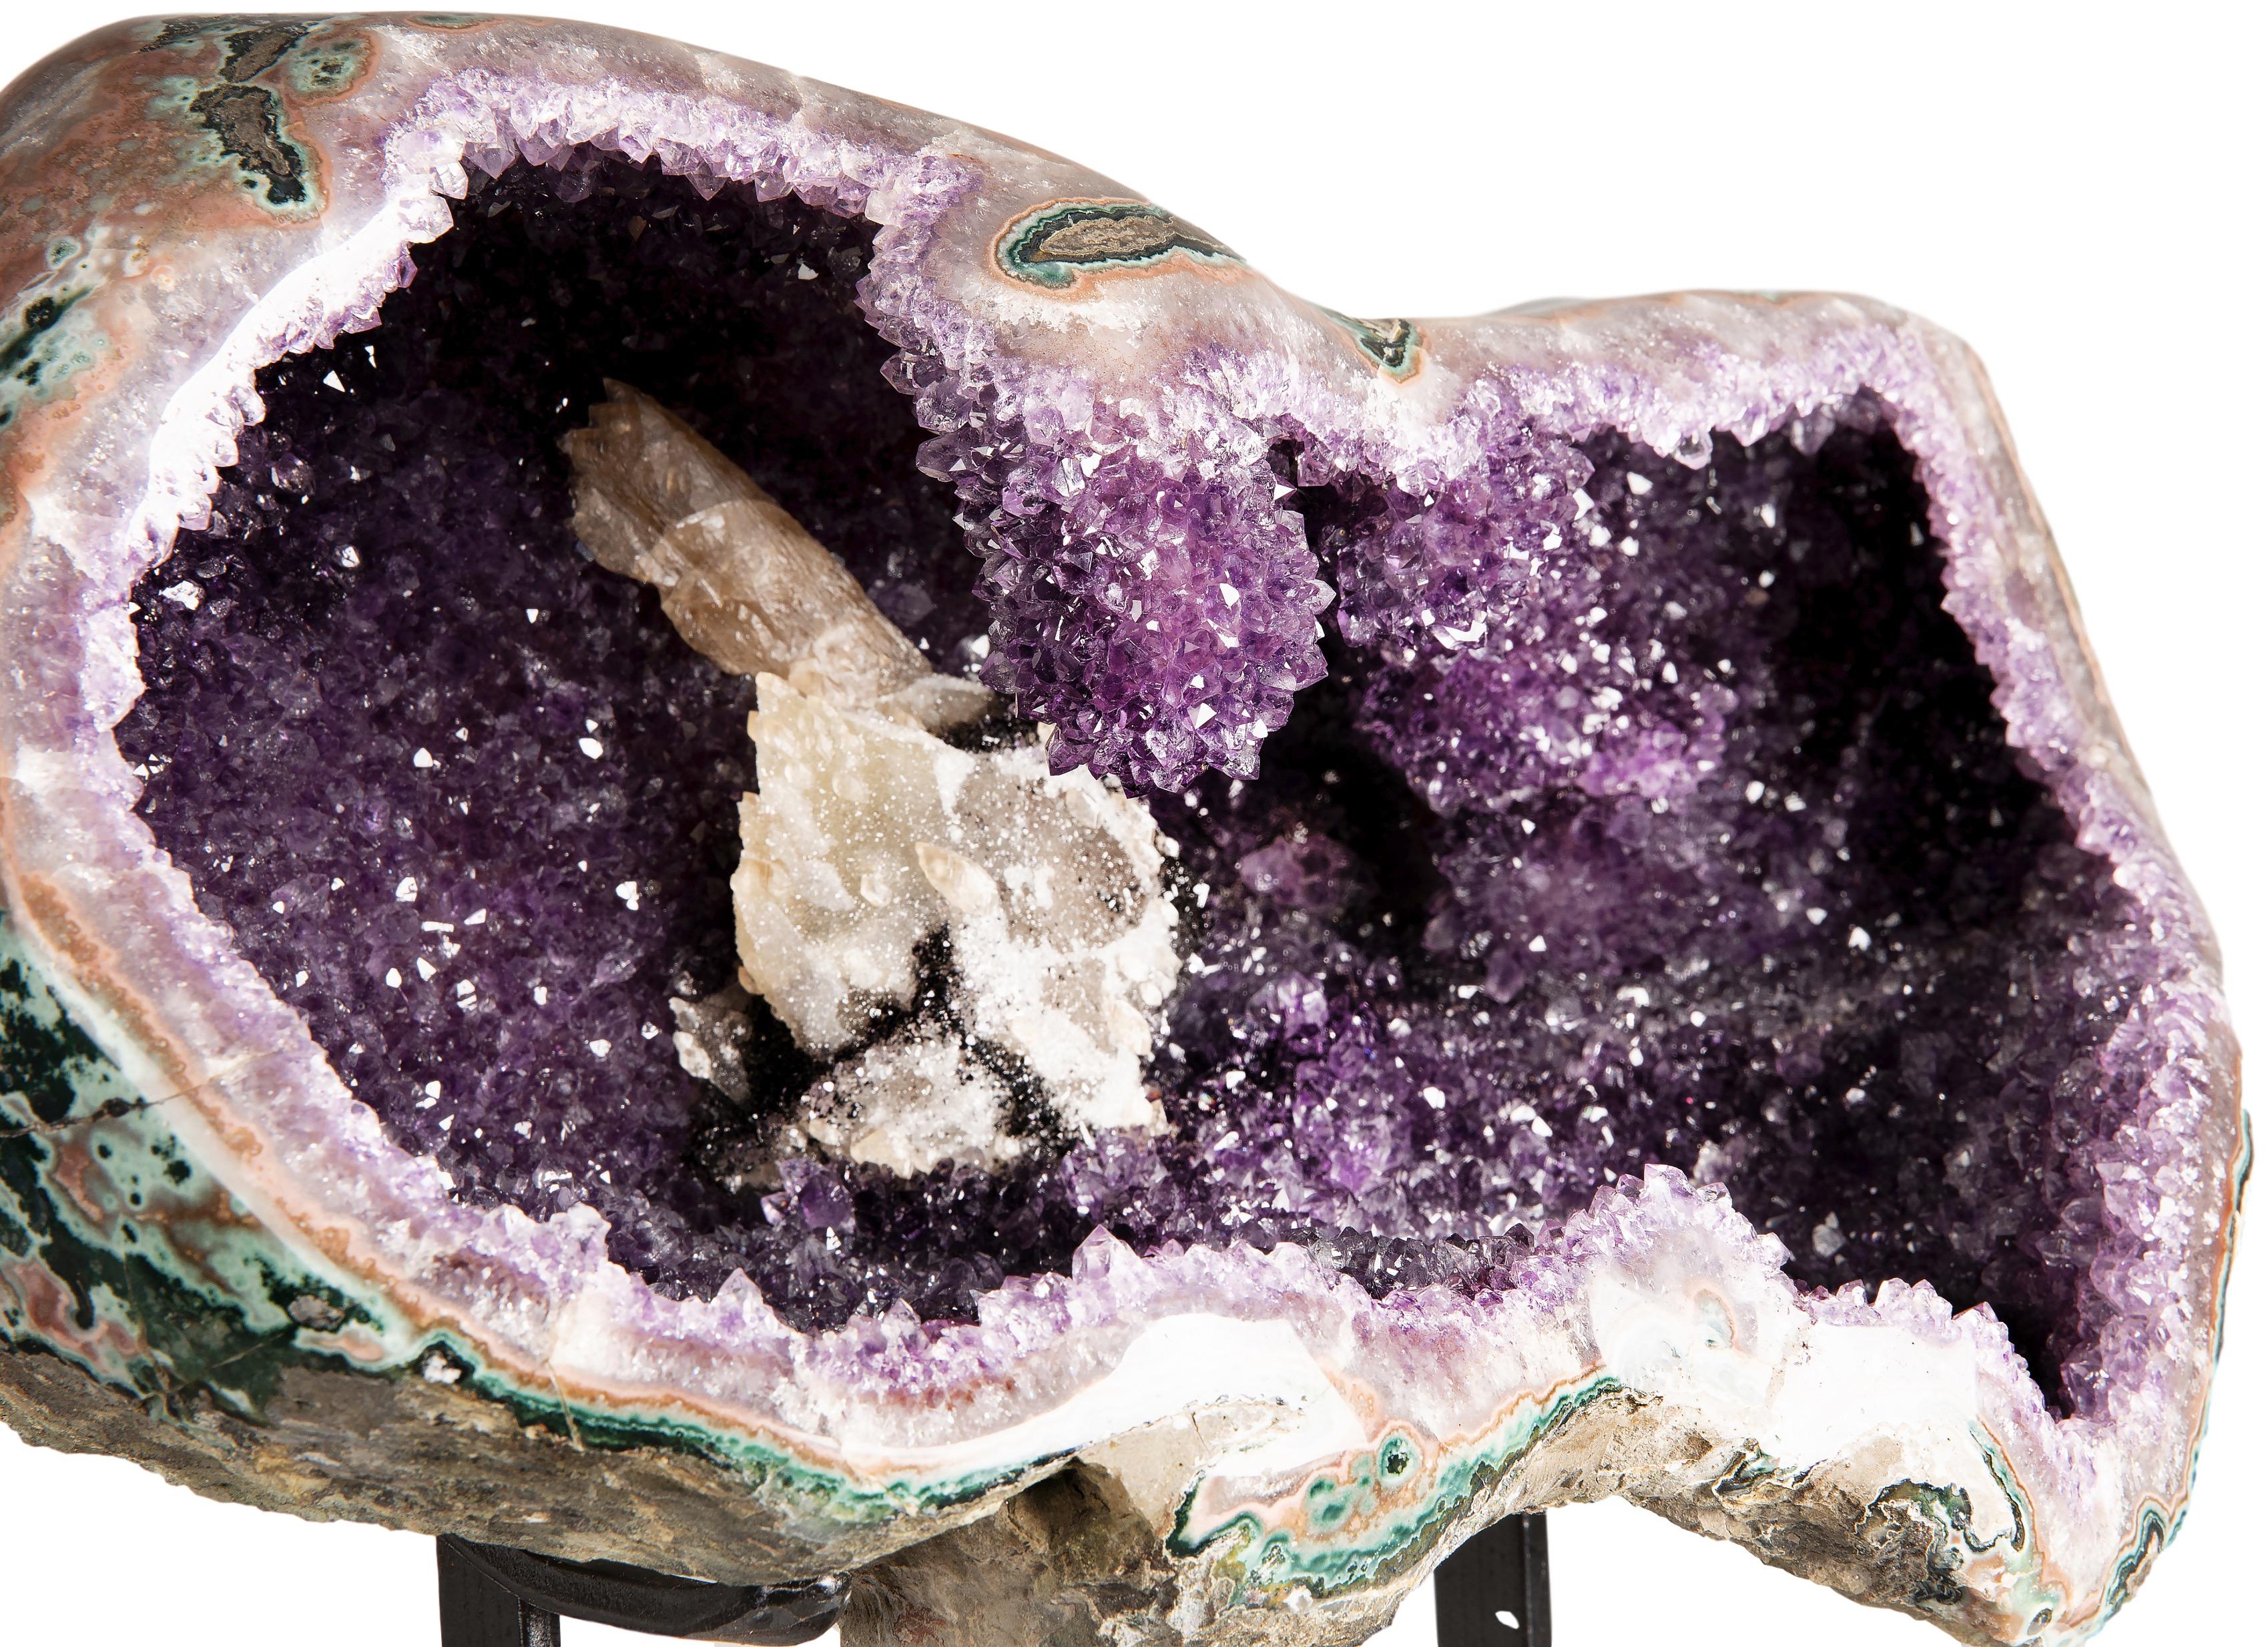 Uruguayan Half Amethyst Geode with Calcite Formation Overlaid by Hematite and White Quartz